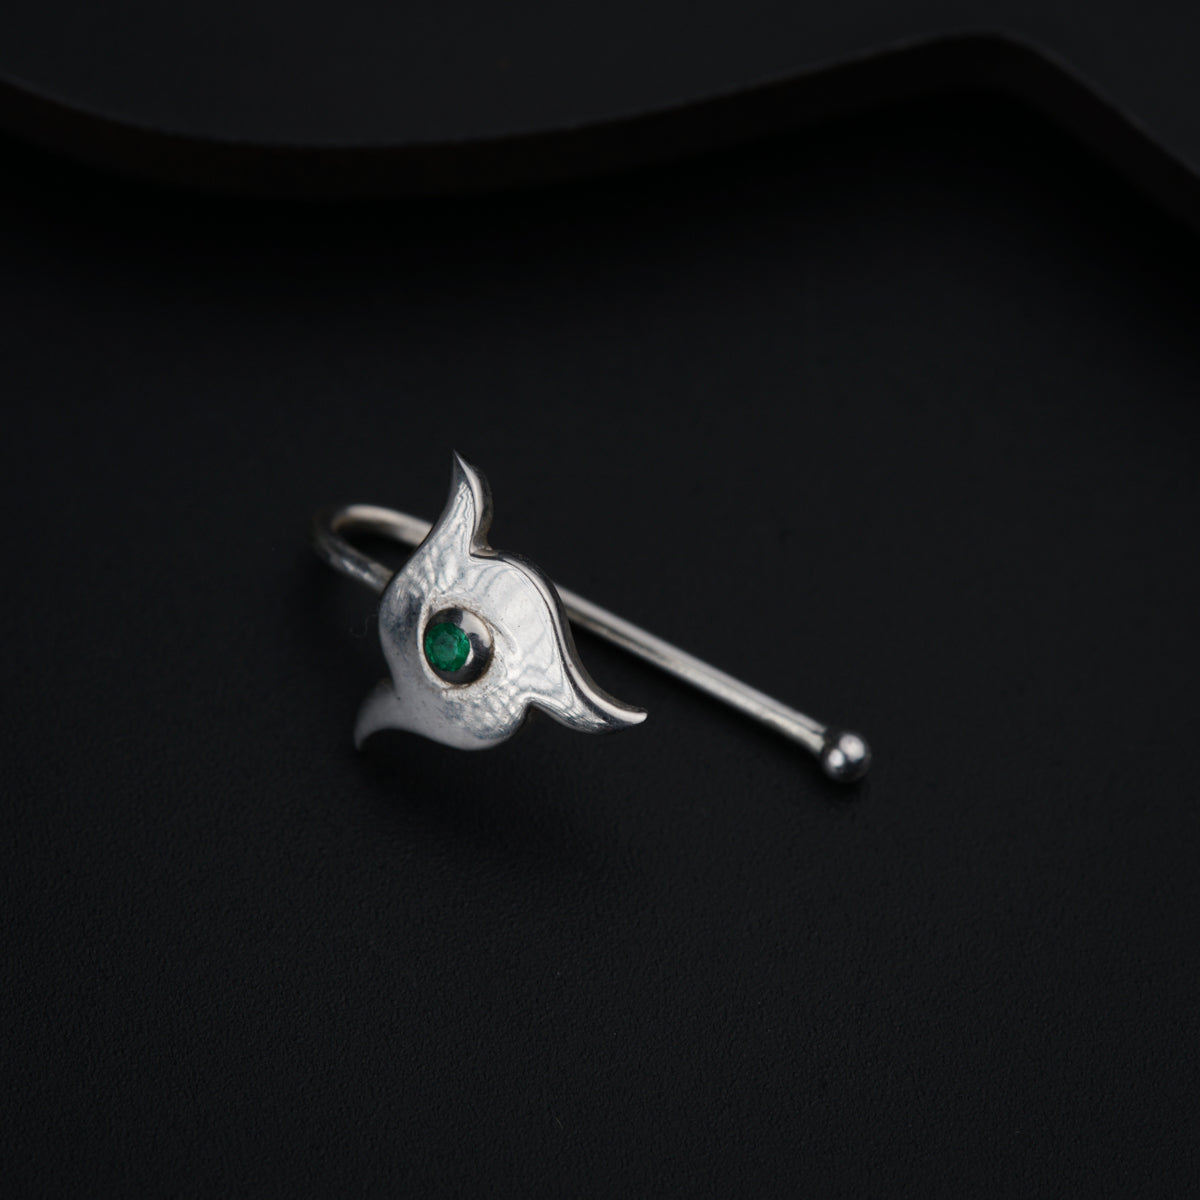 a cat brooch with a green eye on a black background